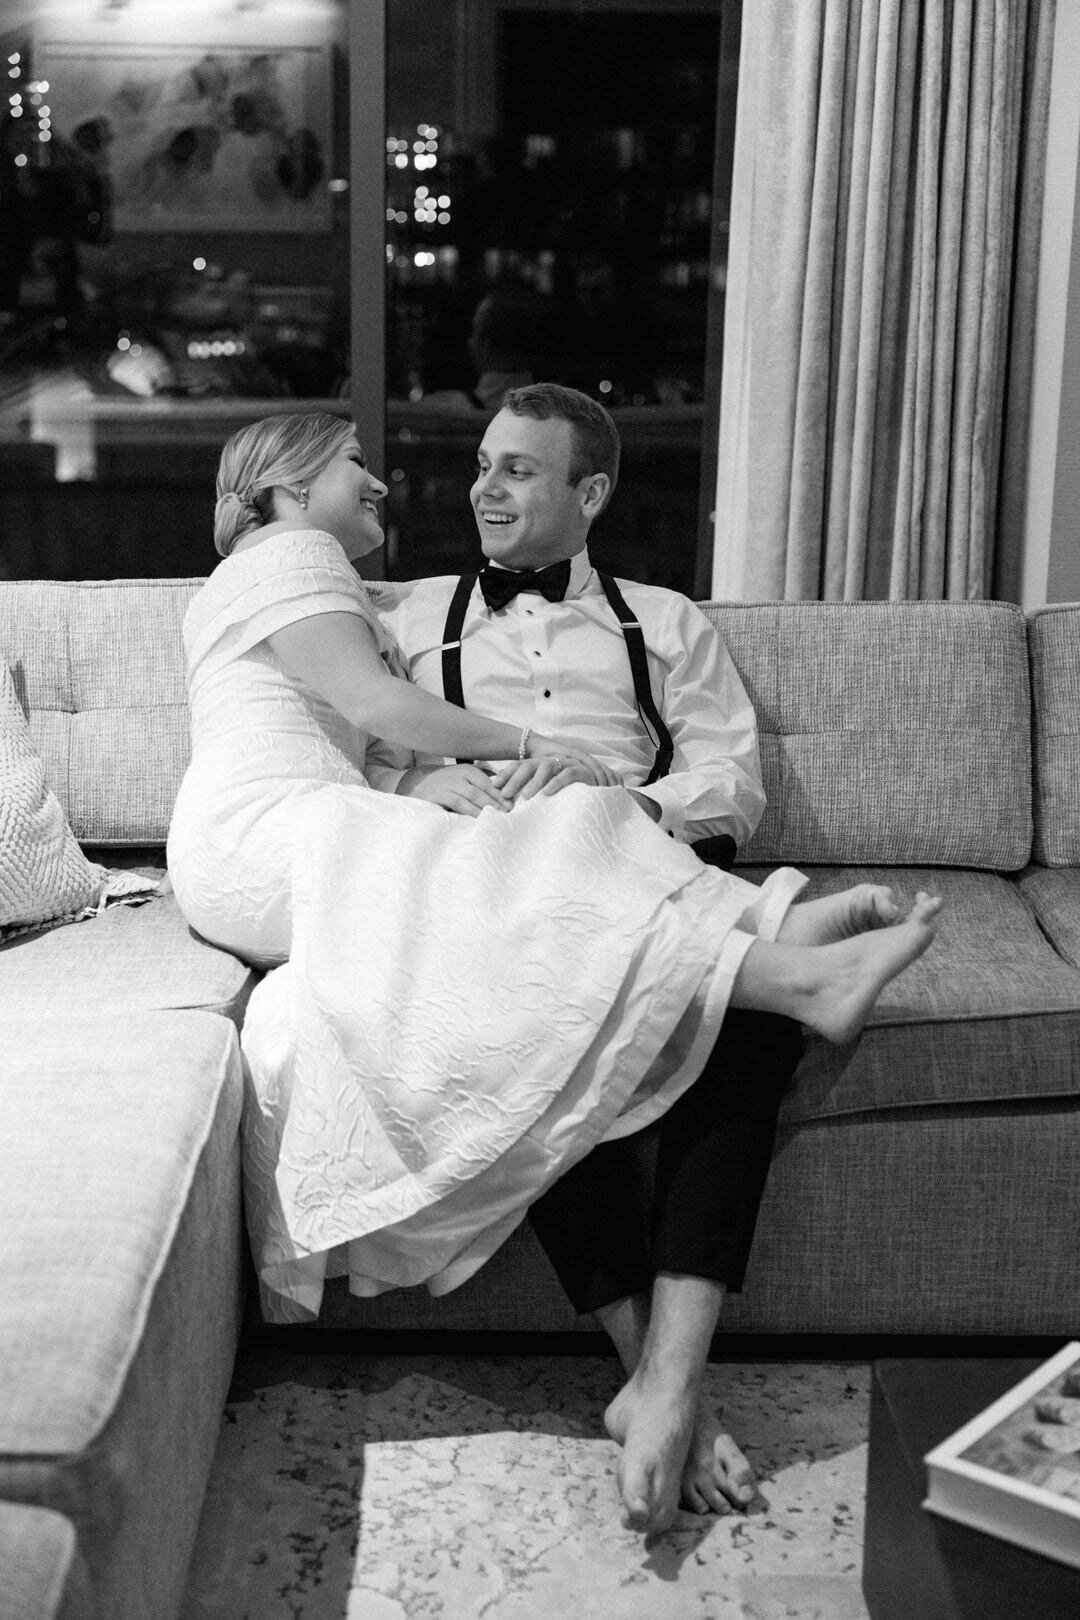 Black and white of Bride and Groom on Couch at St.Regis Atlanta